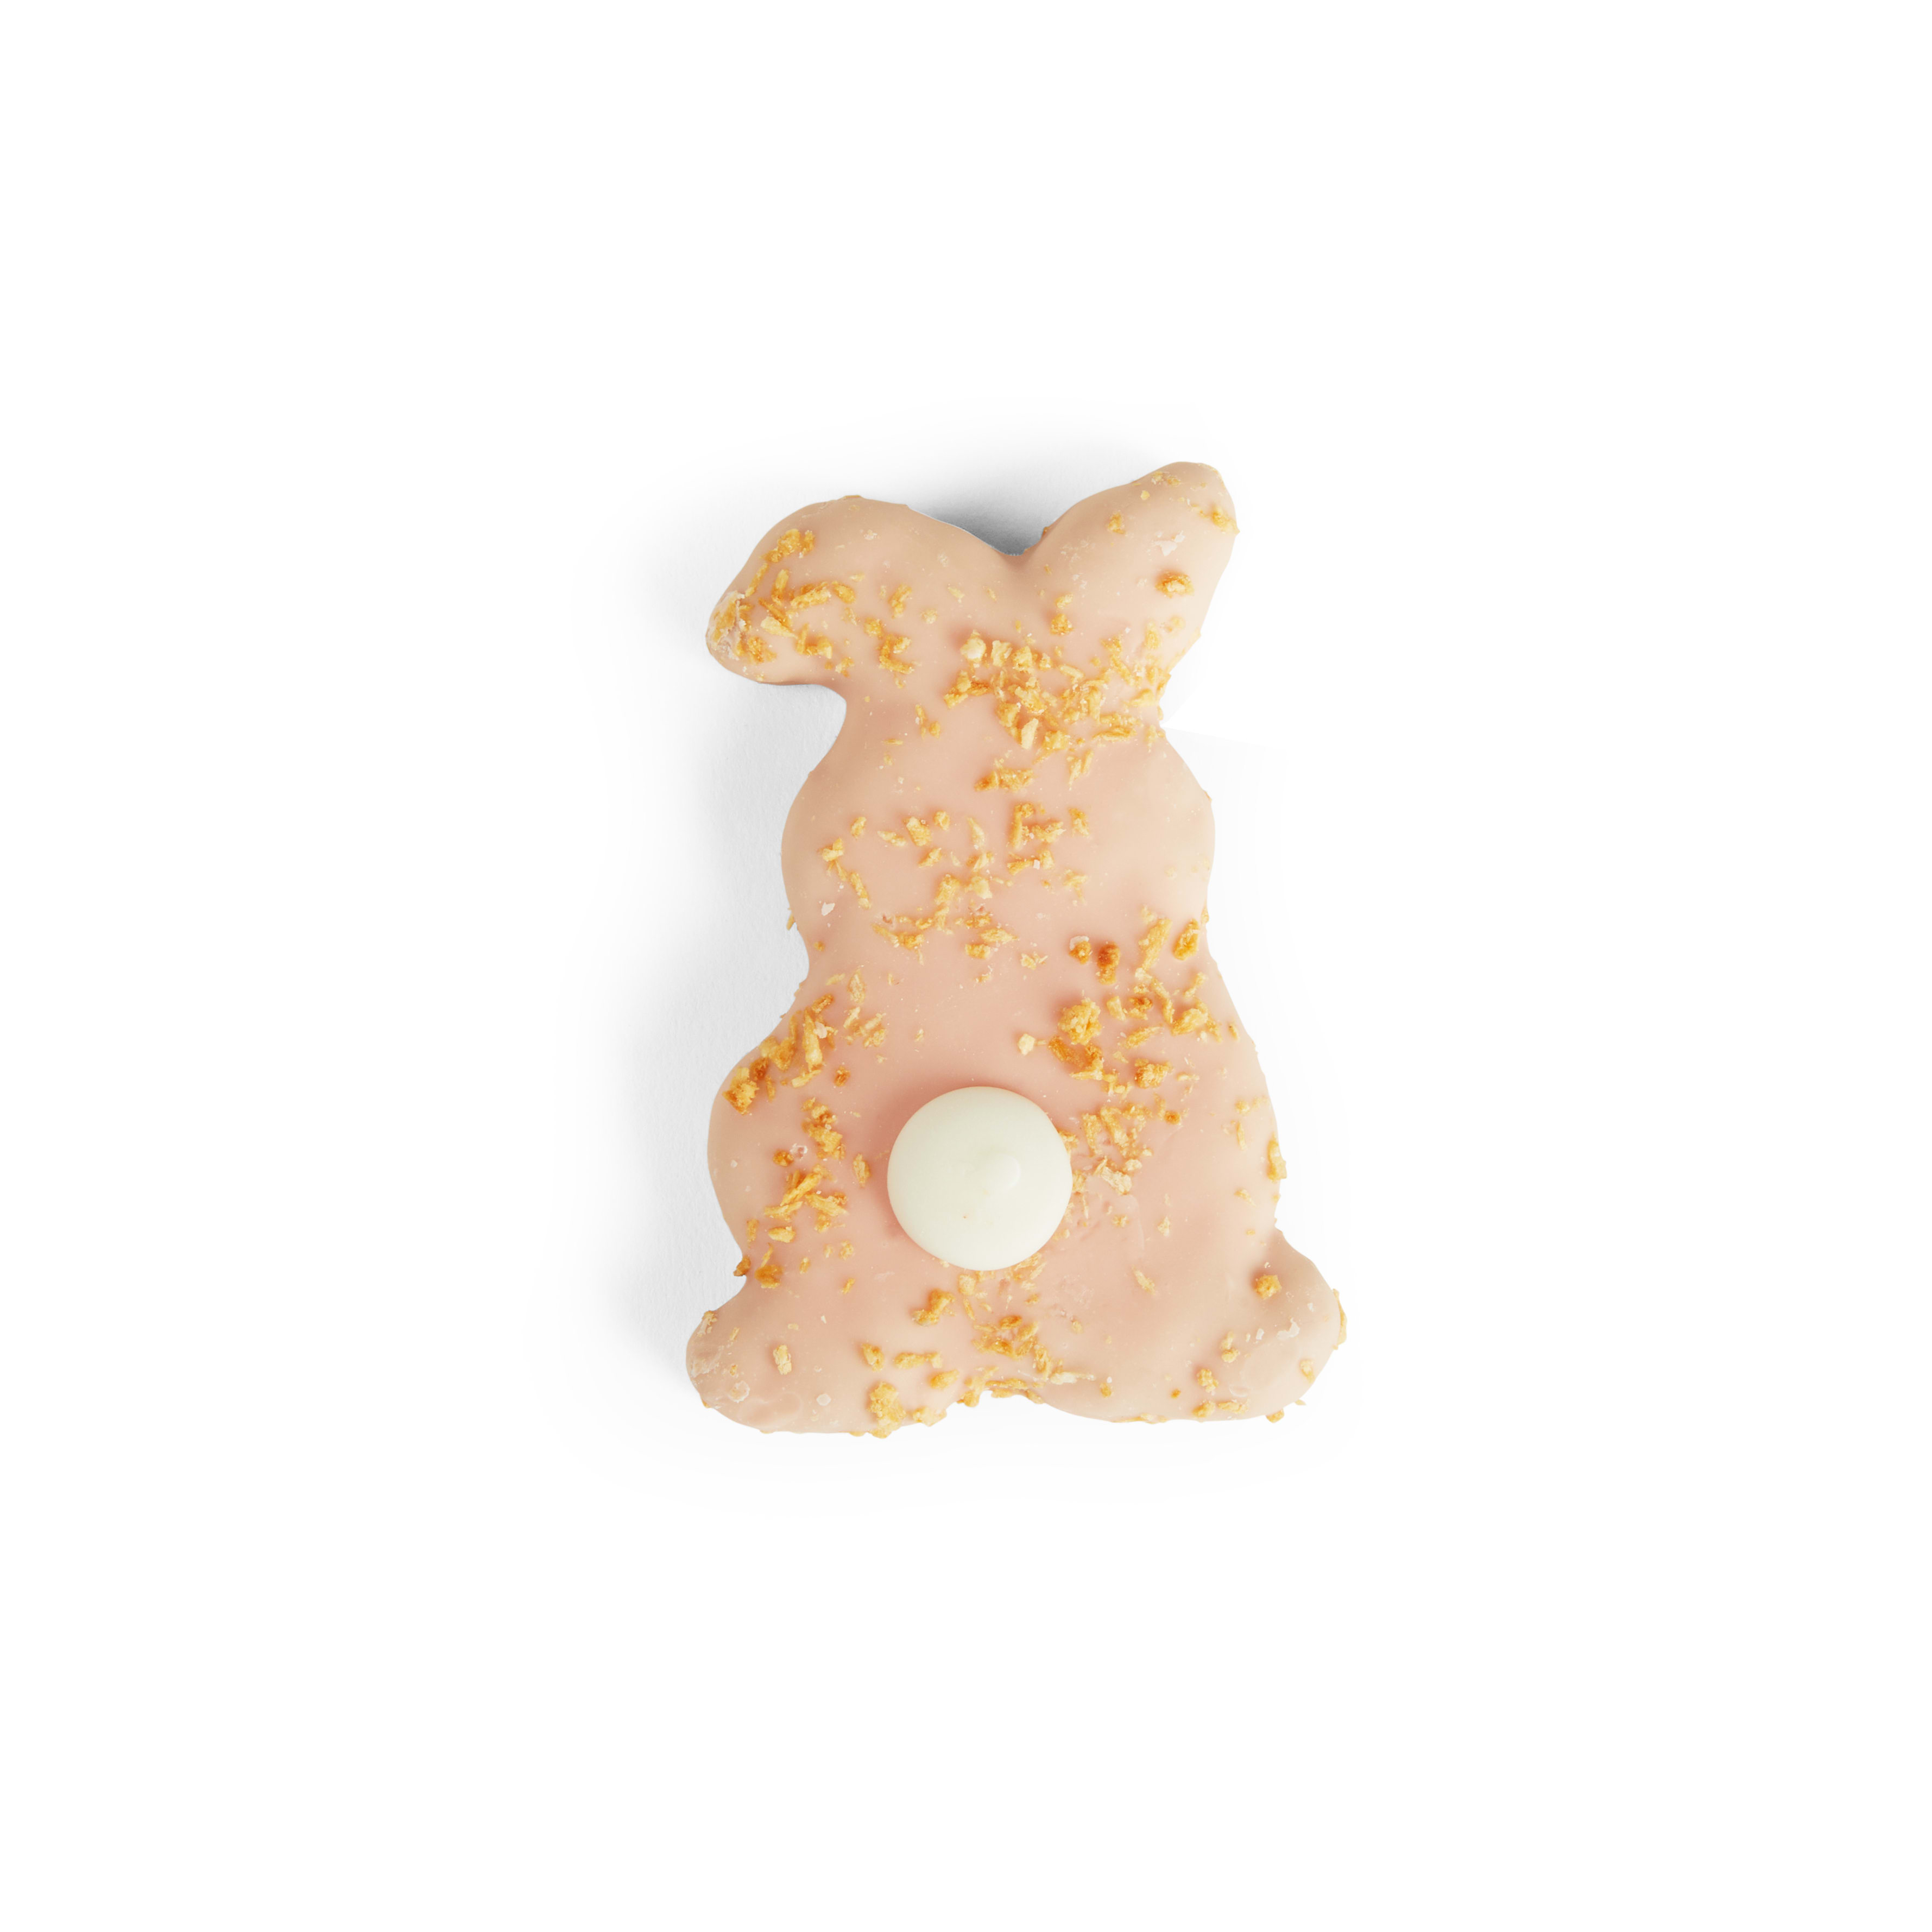 YOULY Easter Bunny Cookie for Dogs, 1.38 oz. Petco